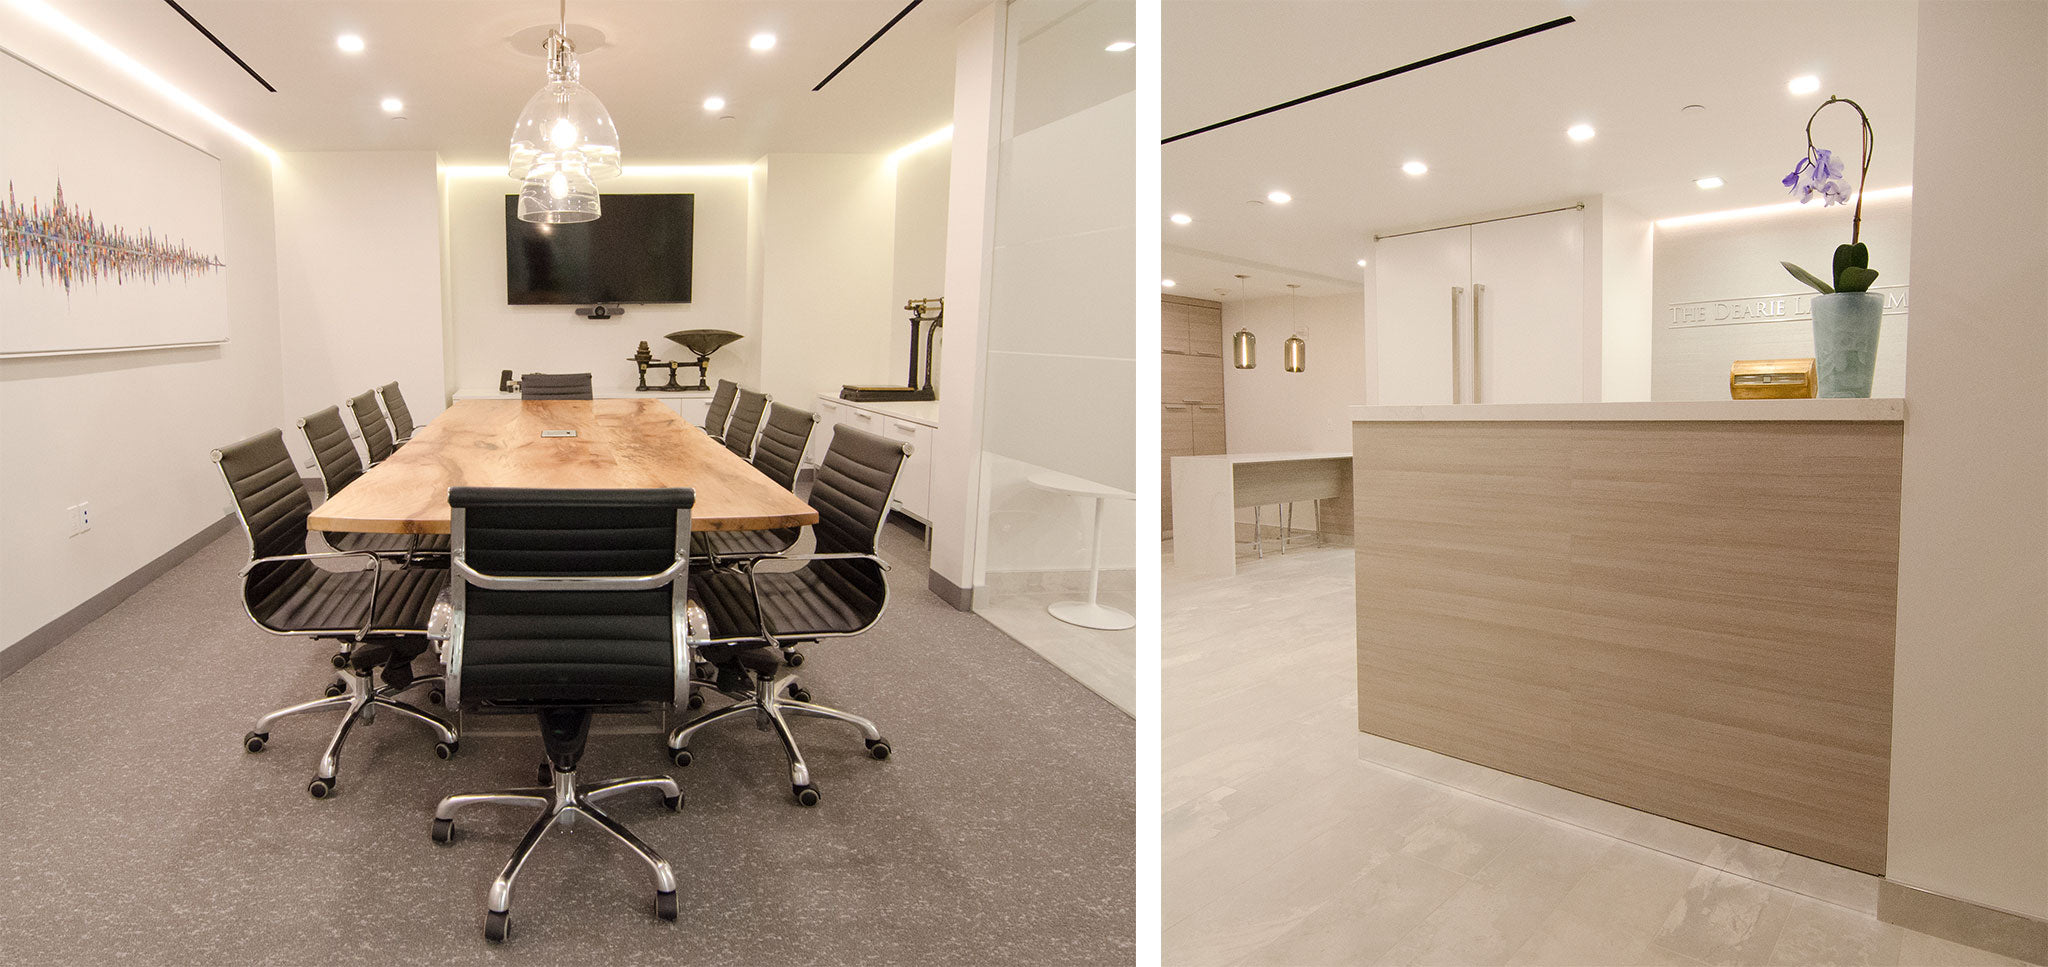 OFH Office Design Project - The Dearie Law Firm